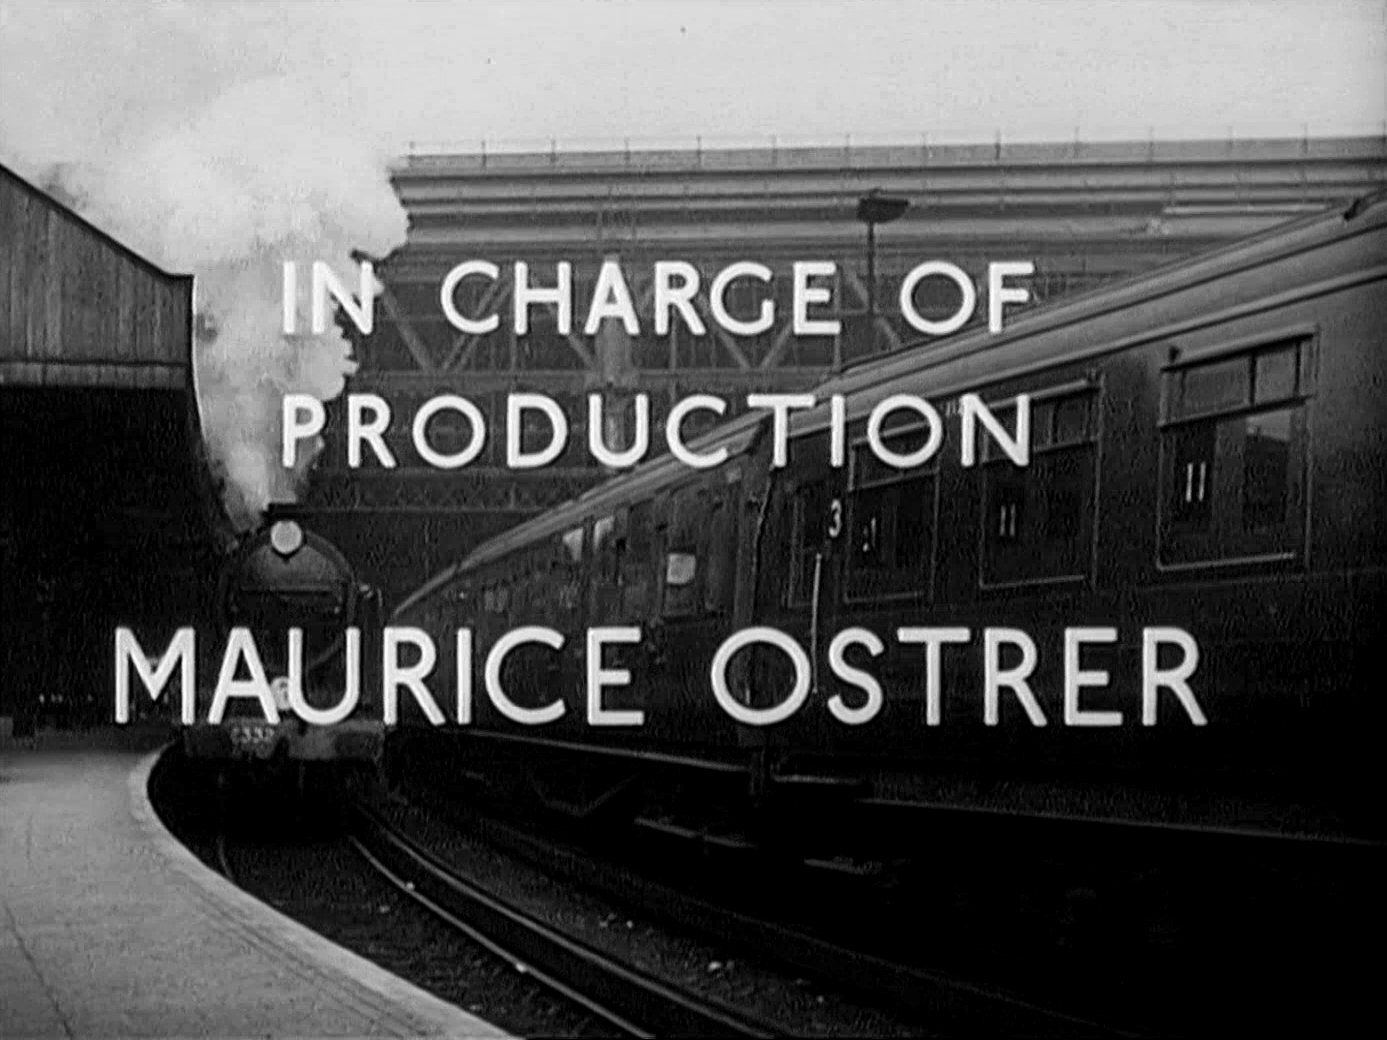 Main title from Waterloo Road (1945) (13). In charge of production, Maurice Ostrer